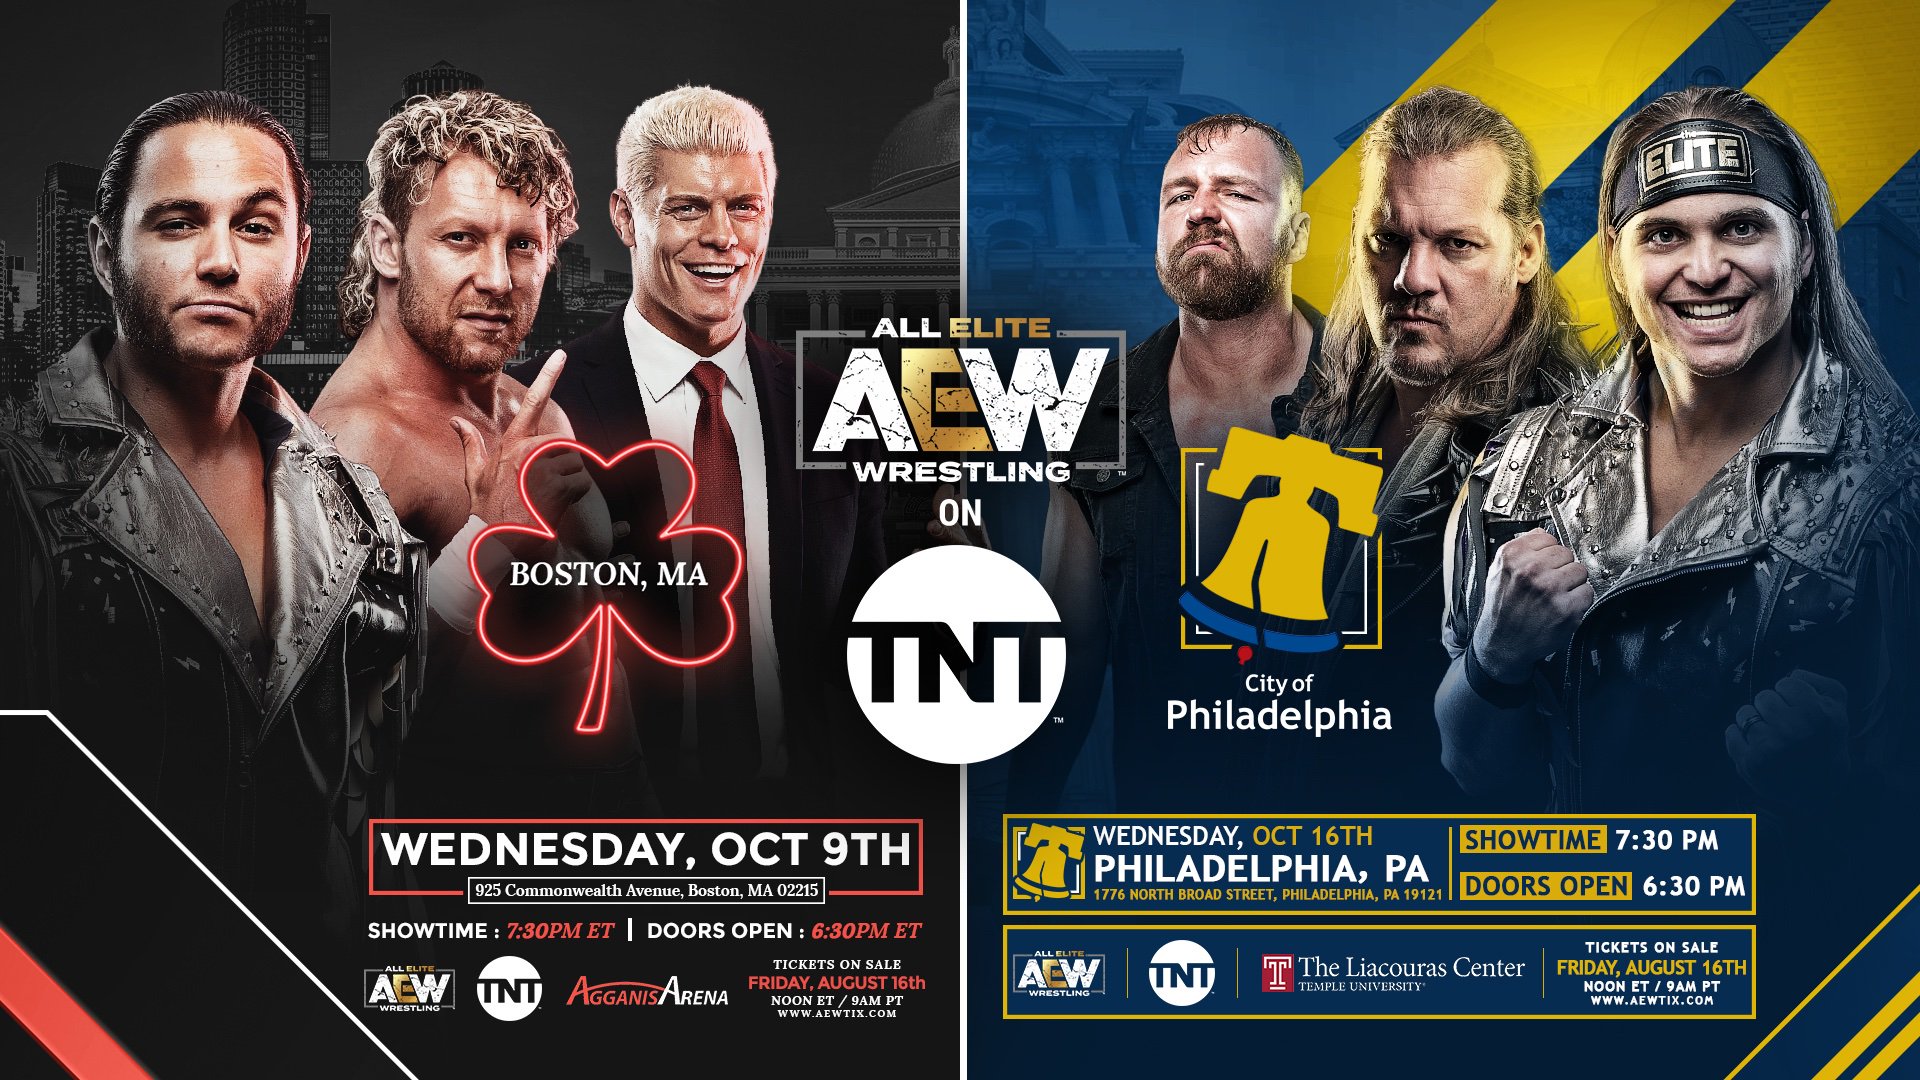 All Elite Wrestling to Launch on TNT Wednesdays in October